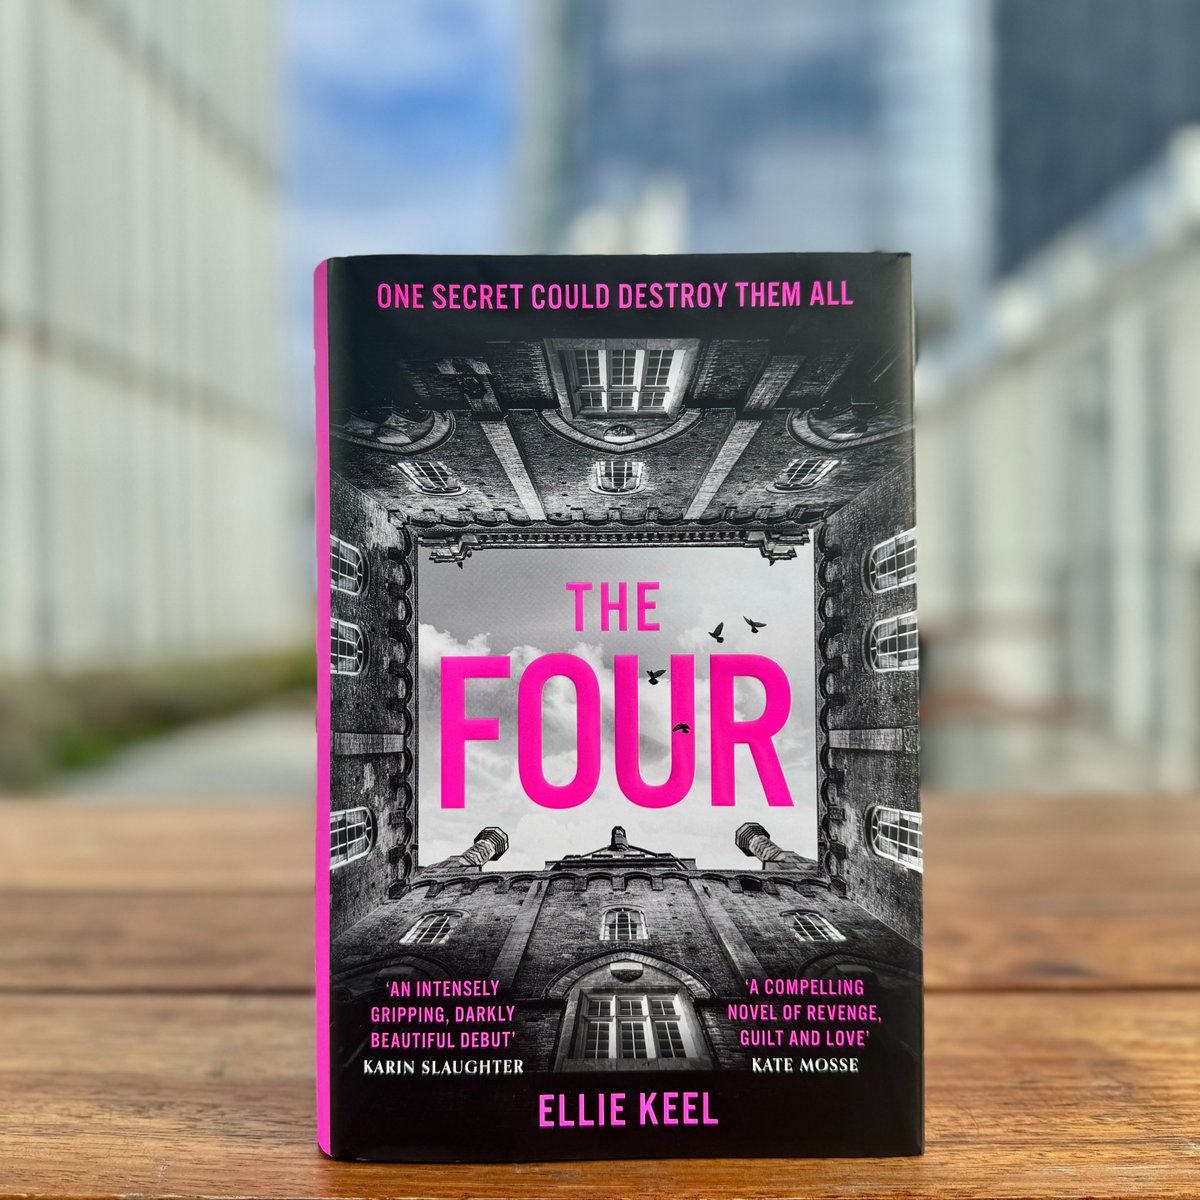 ‘Without a doubt my favourite book of 2024 so far’ ⭐️⭐️⭐️⭐️⭐️ ‘Wow! What a brilliantly dark, powerful and raw debut’ ⭐️⭐️⭐️⭐️⭐️ ‘Every single word used by this author was chosen with care’ ⭐️⭐️⭐️⭐️⭐️ #TheFour by @elliekeel1 is out now: ow.ly/ZG9050Rpble